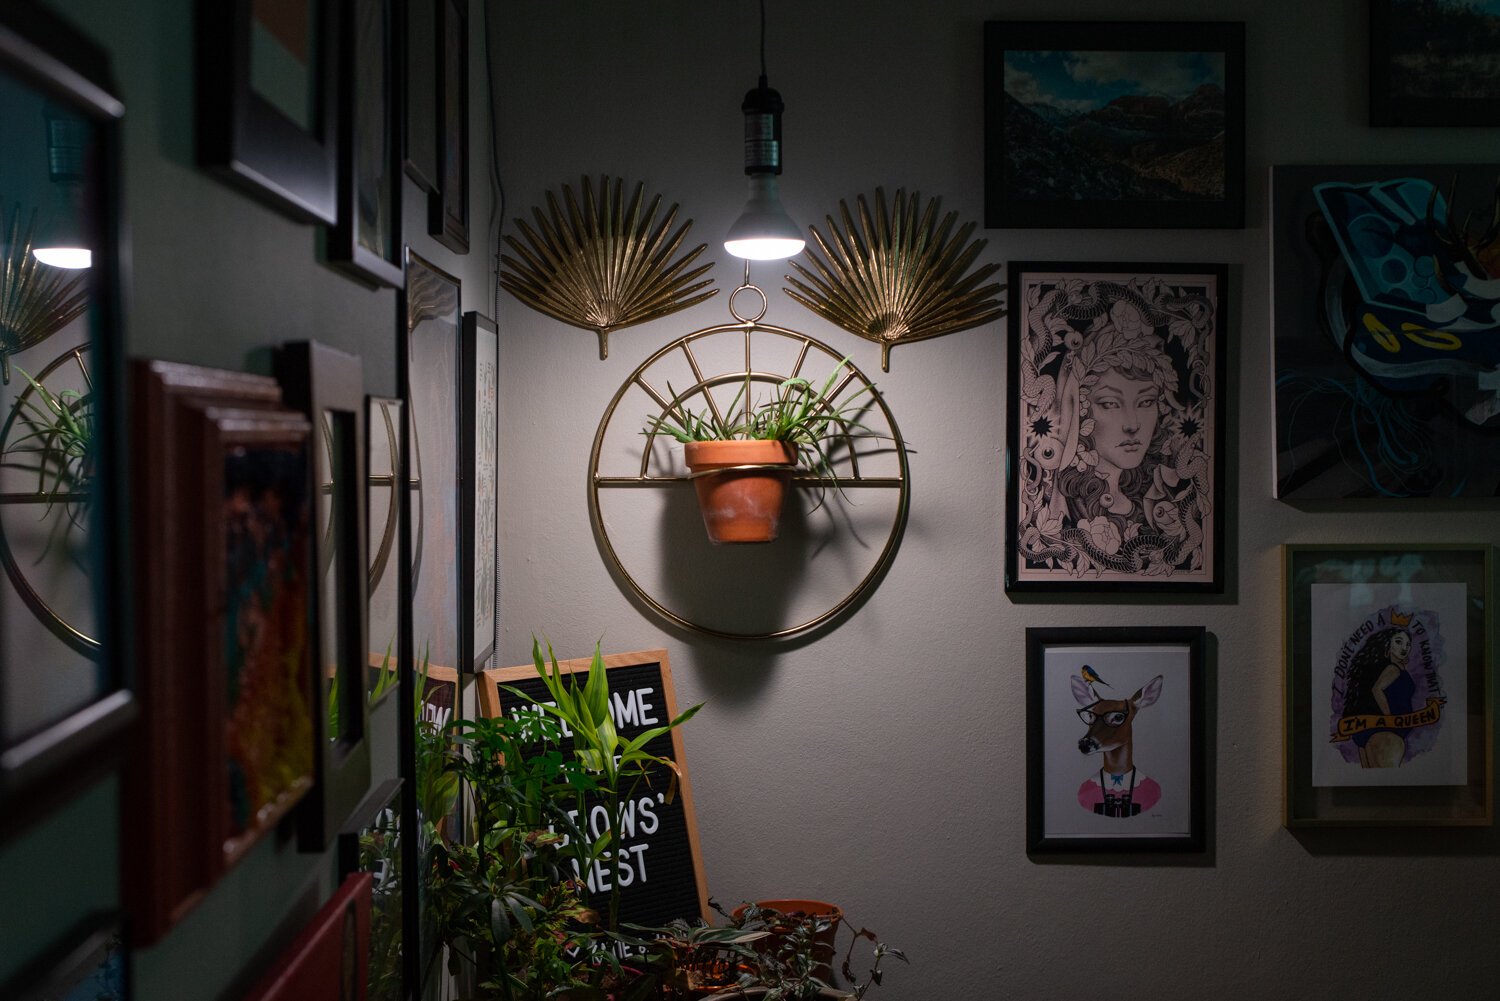 A plant holder from Sarah Gaines and decorative fans from a garage sale hang on the wall at the home of Katie Jo and Tobi Newson.